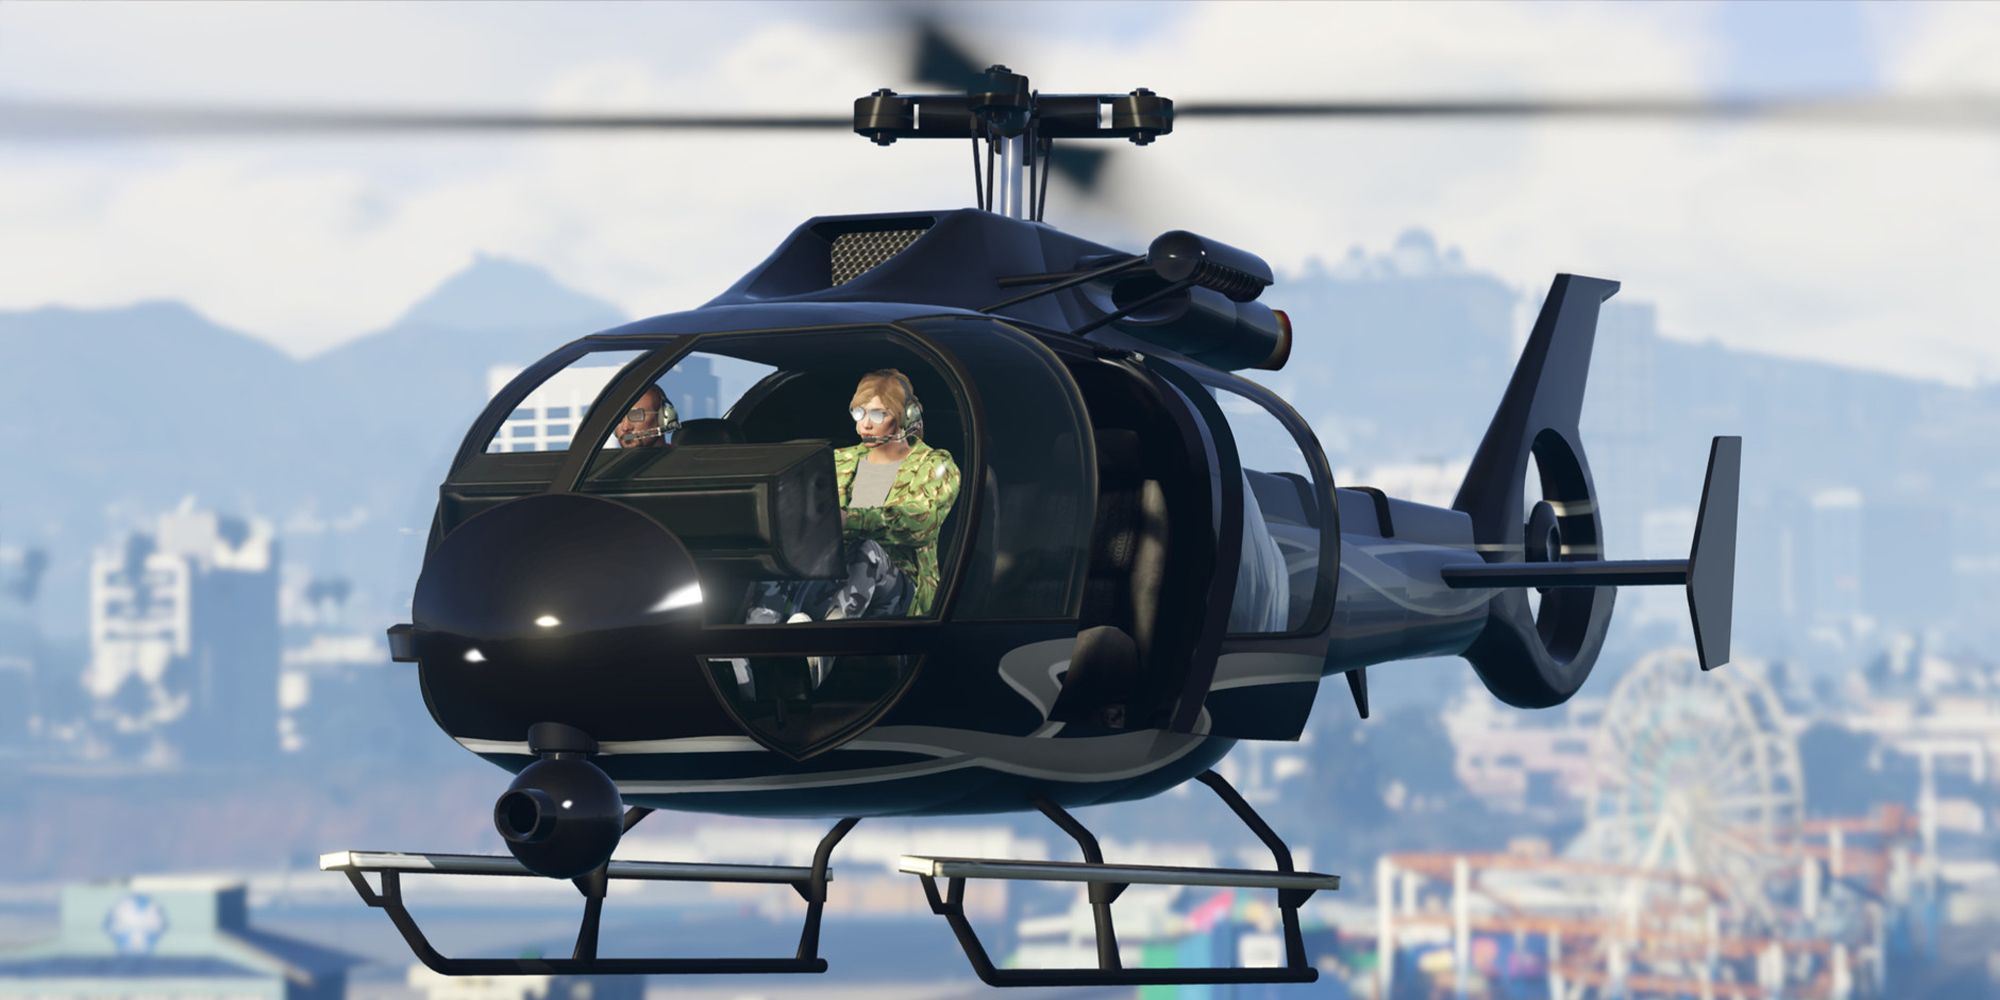 A helicopter being flown by a player in GTA Online.